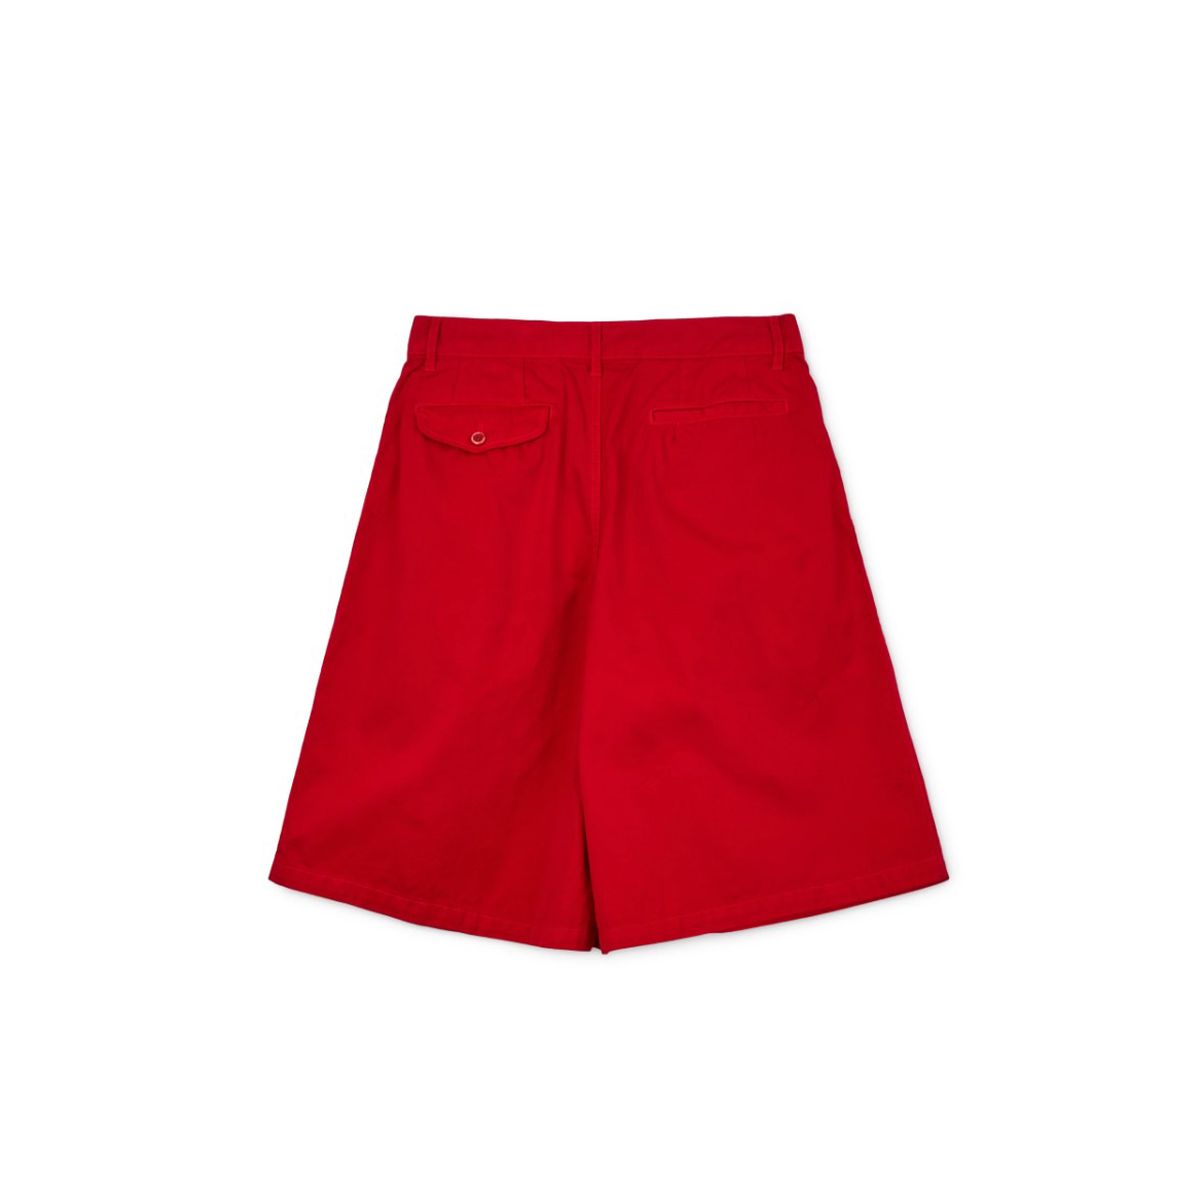 Woven Drill Shorts In Red